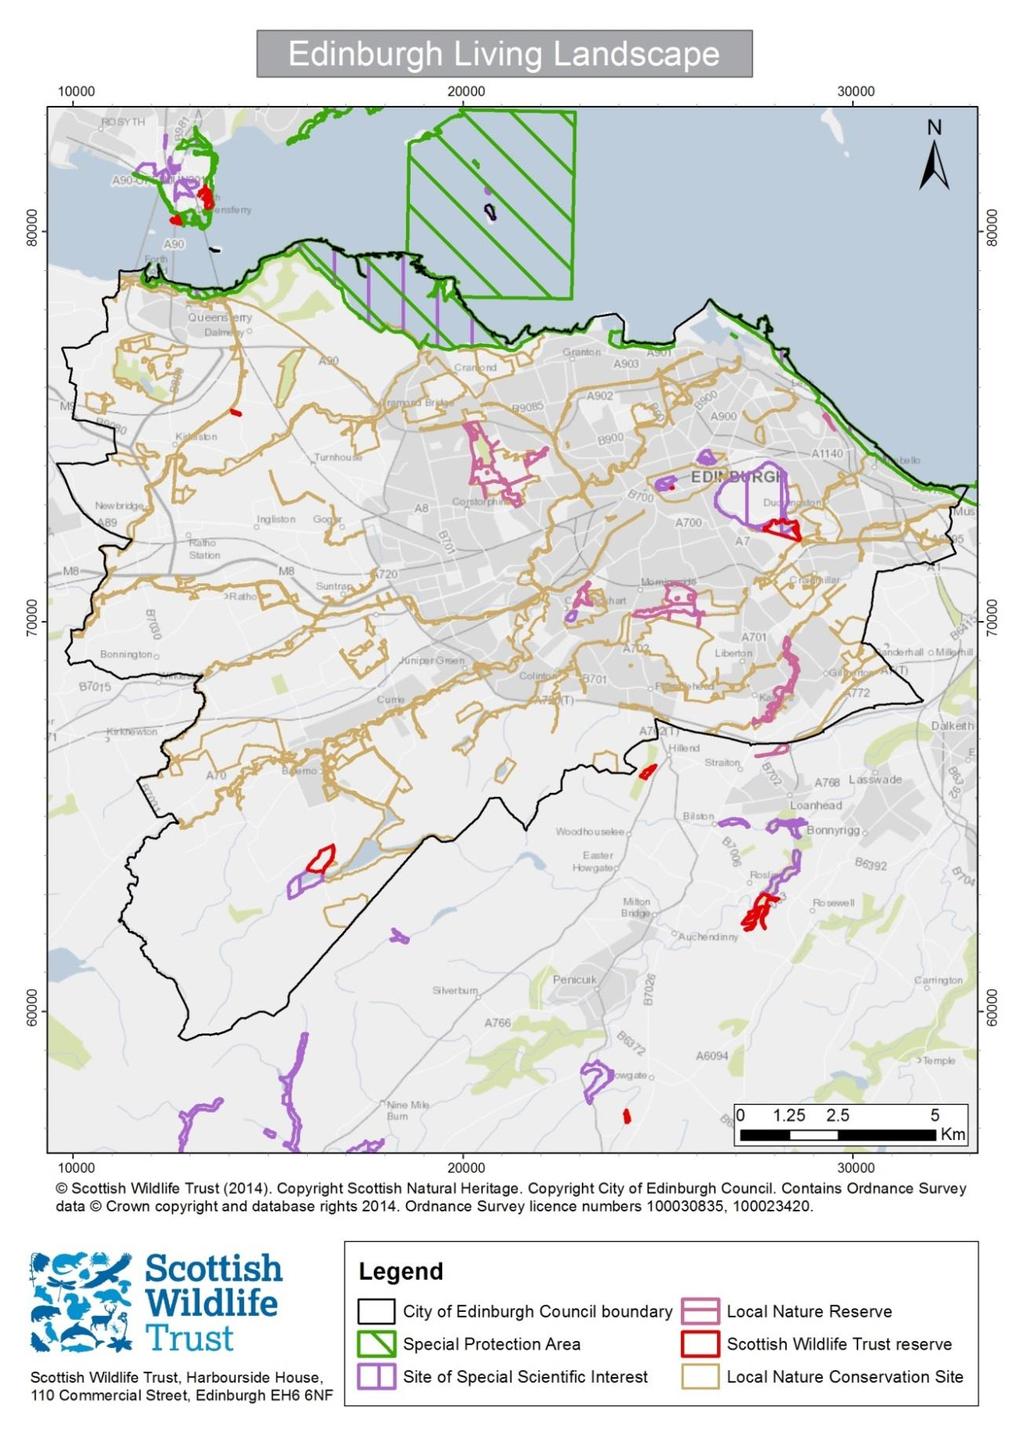 Appendix 1 Map showing Edinburgh Living Landscape boundary (in black) and areas of statutory and non- statutory greenspace (note that the boundaries